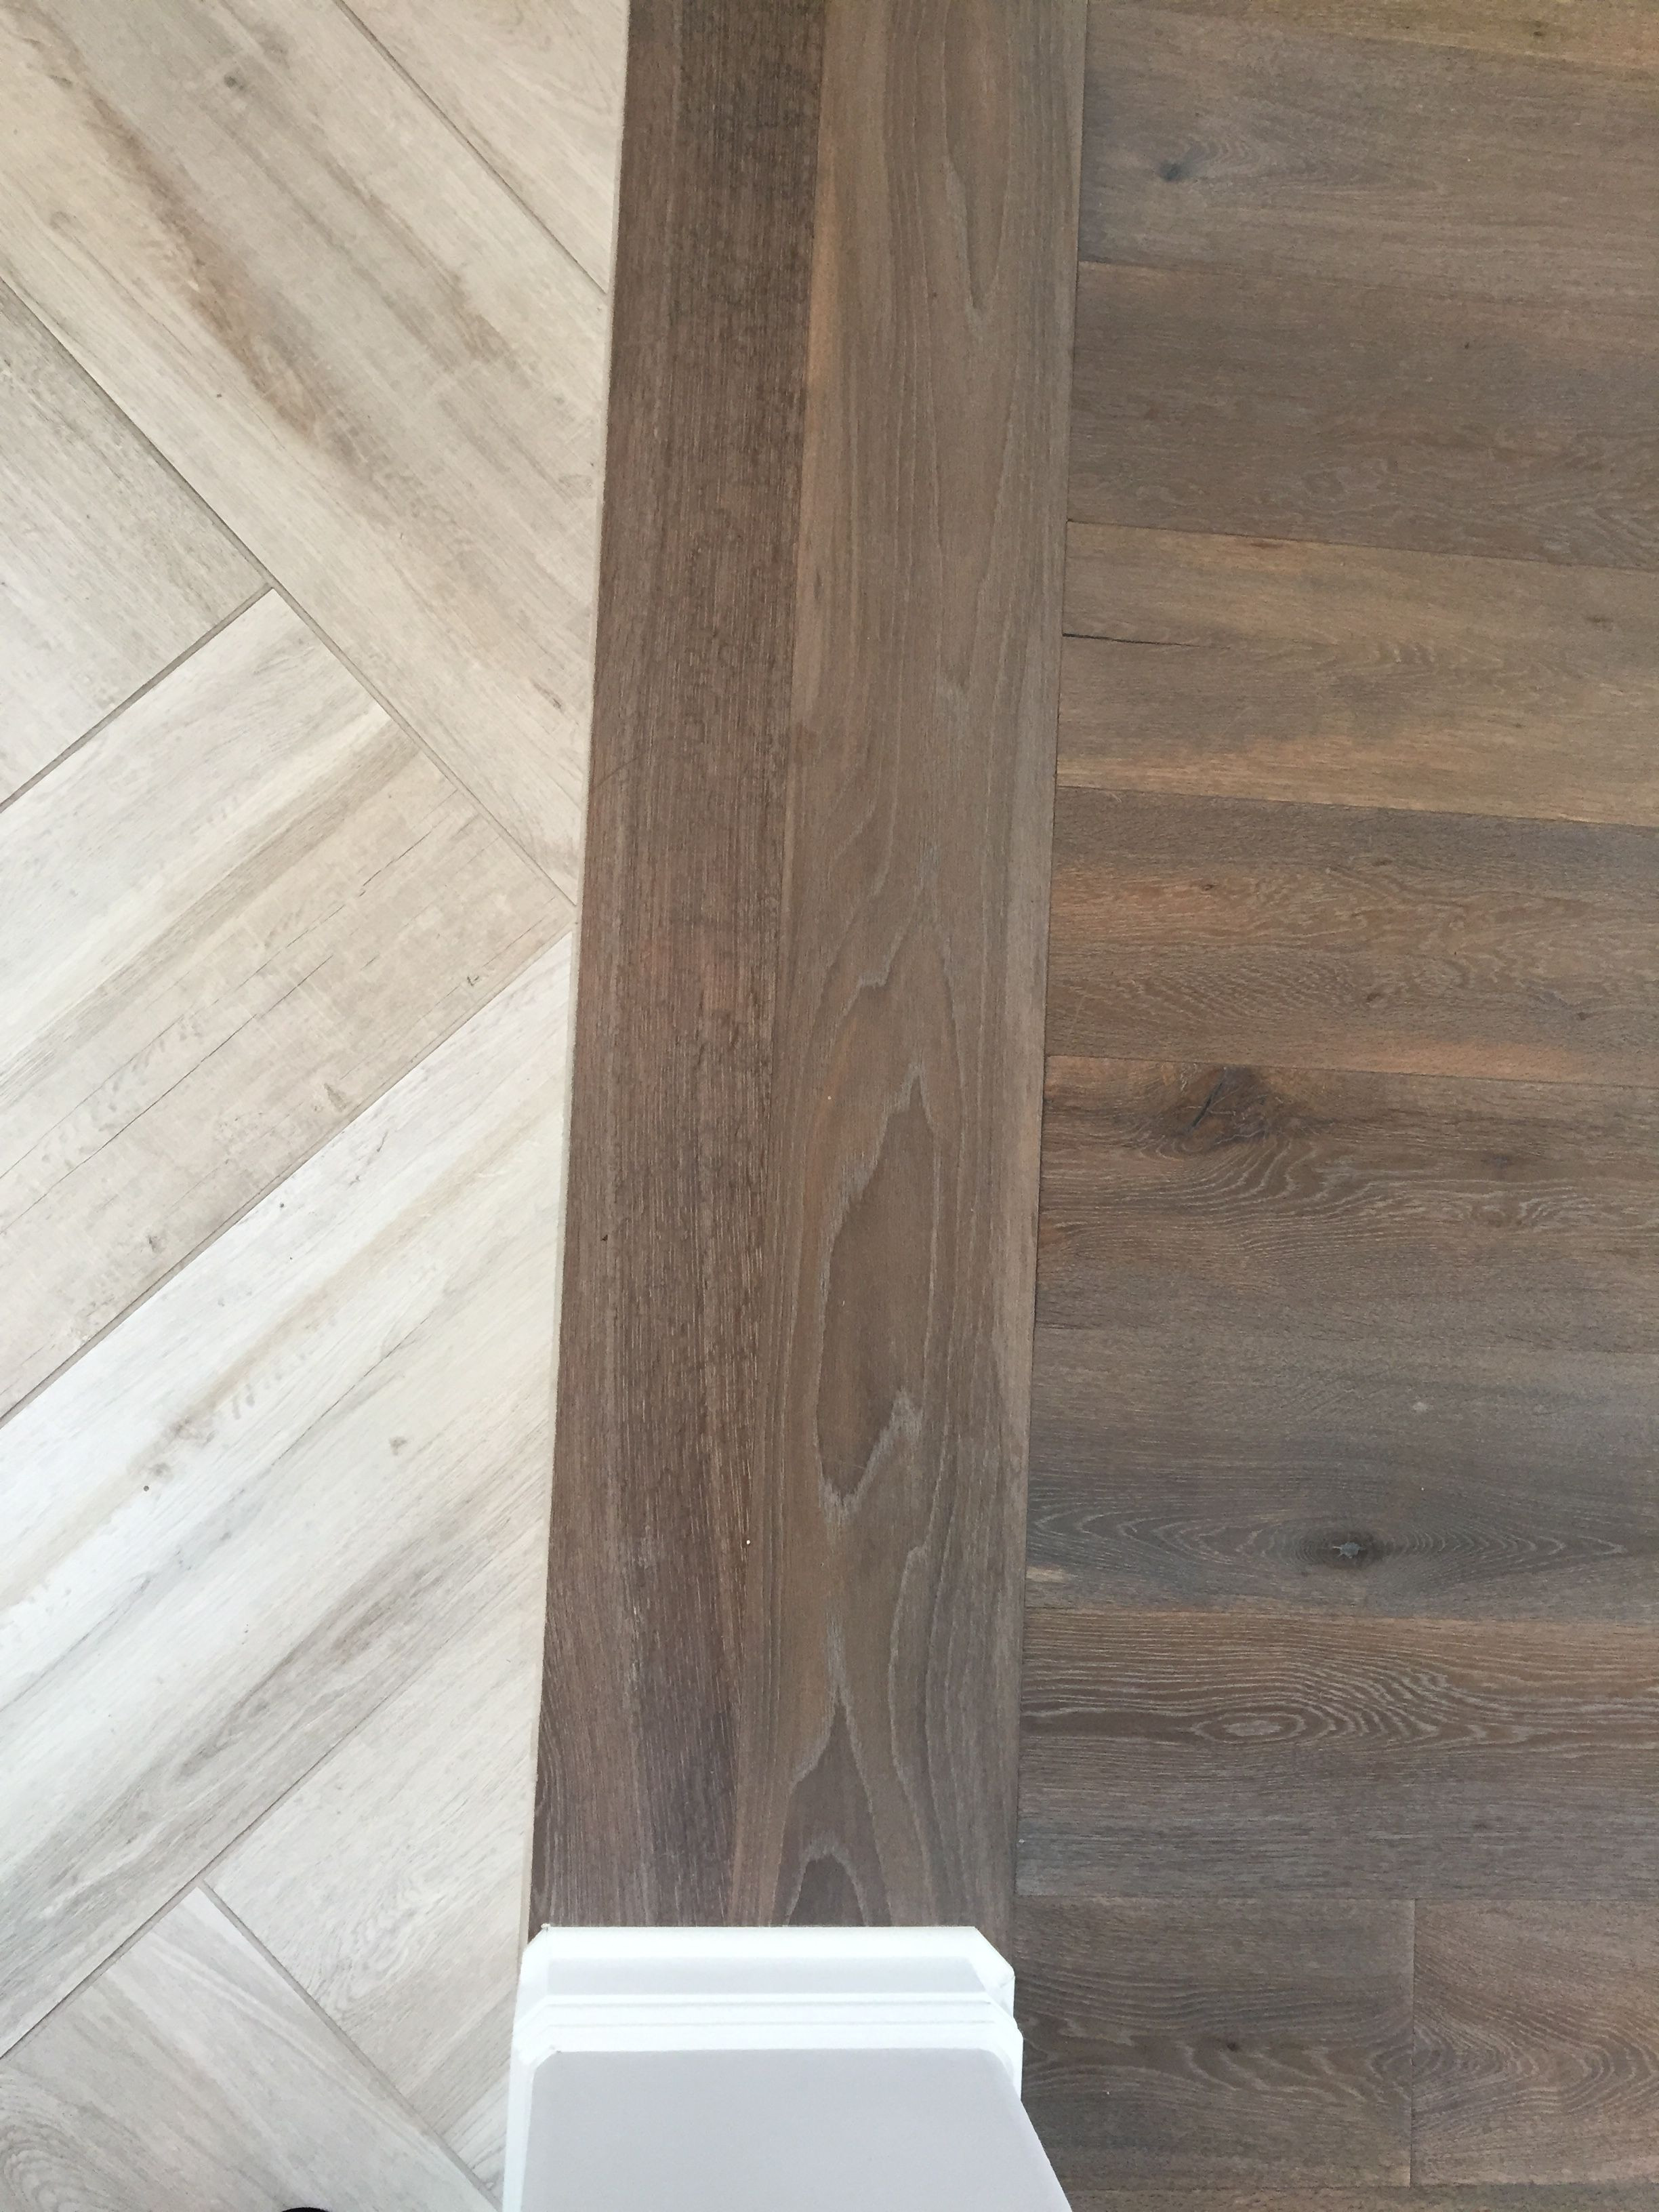 10 Awesome How to Transition Hardwood Floor to Tile 2023 free download how to transition hardwood floor to tile of tile to carpet transition strip awesome od floor tile transition for tile to carpet transition strip inspirational floor transition laminate to he